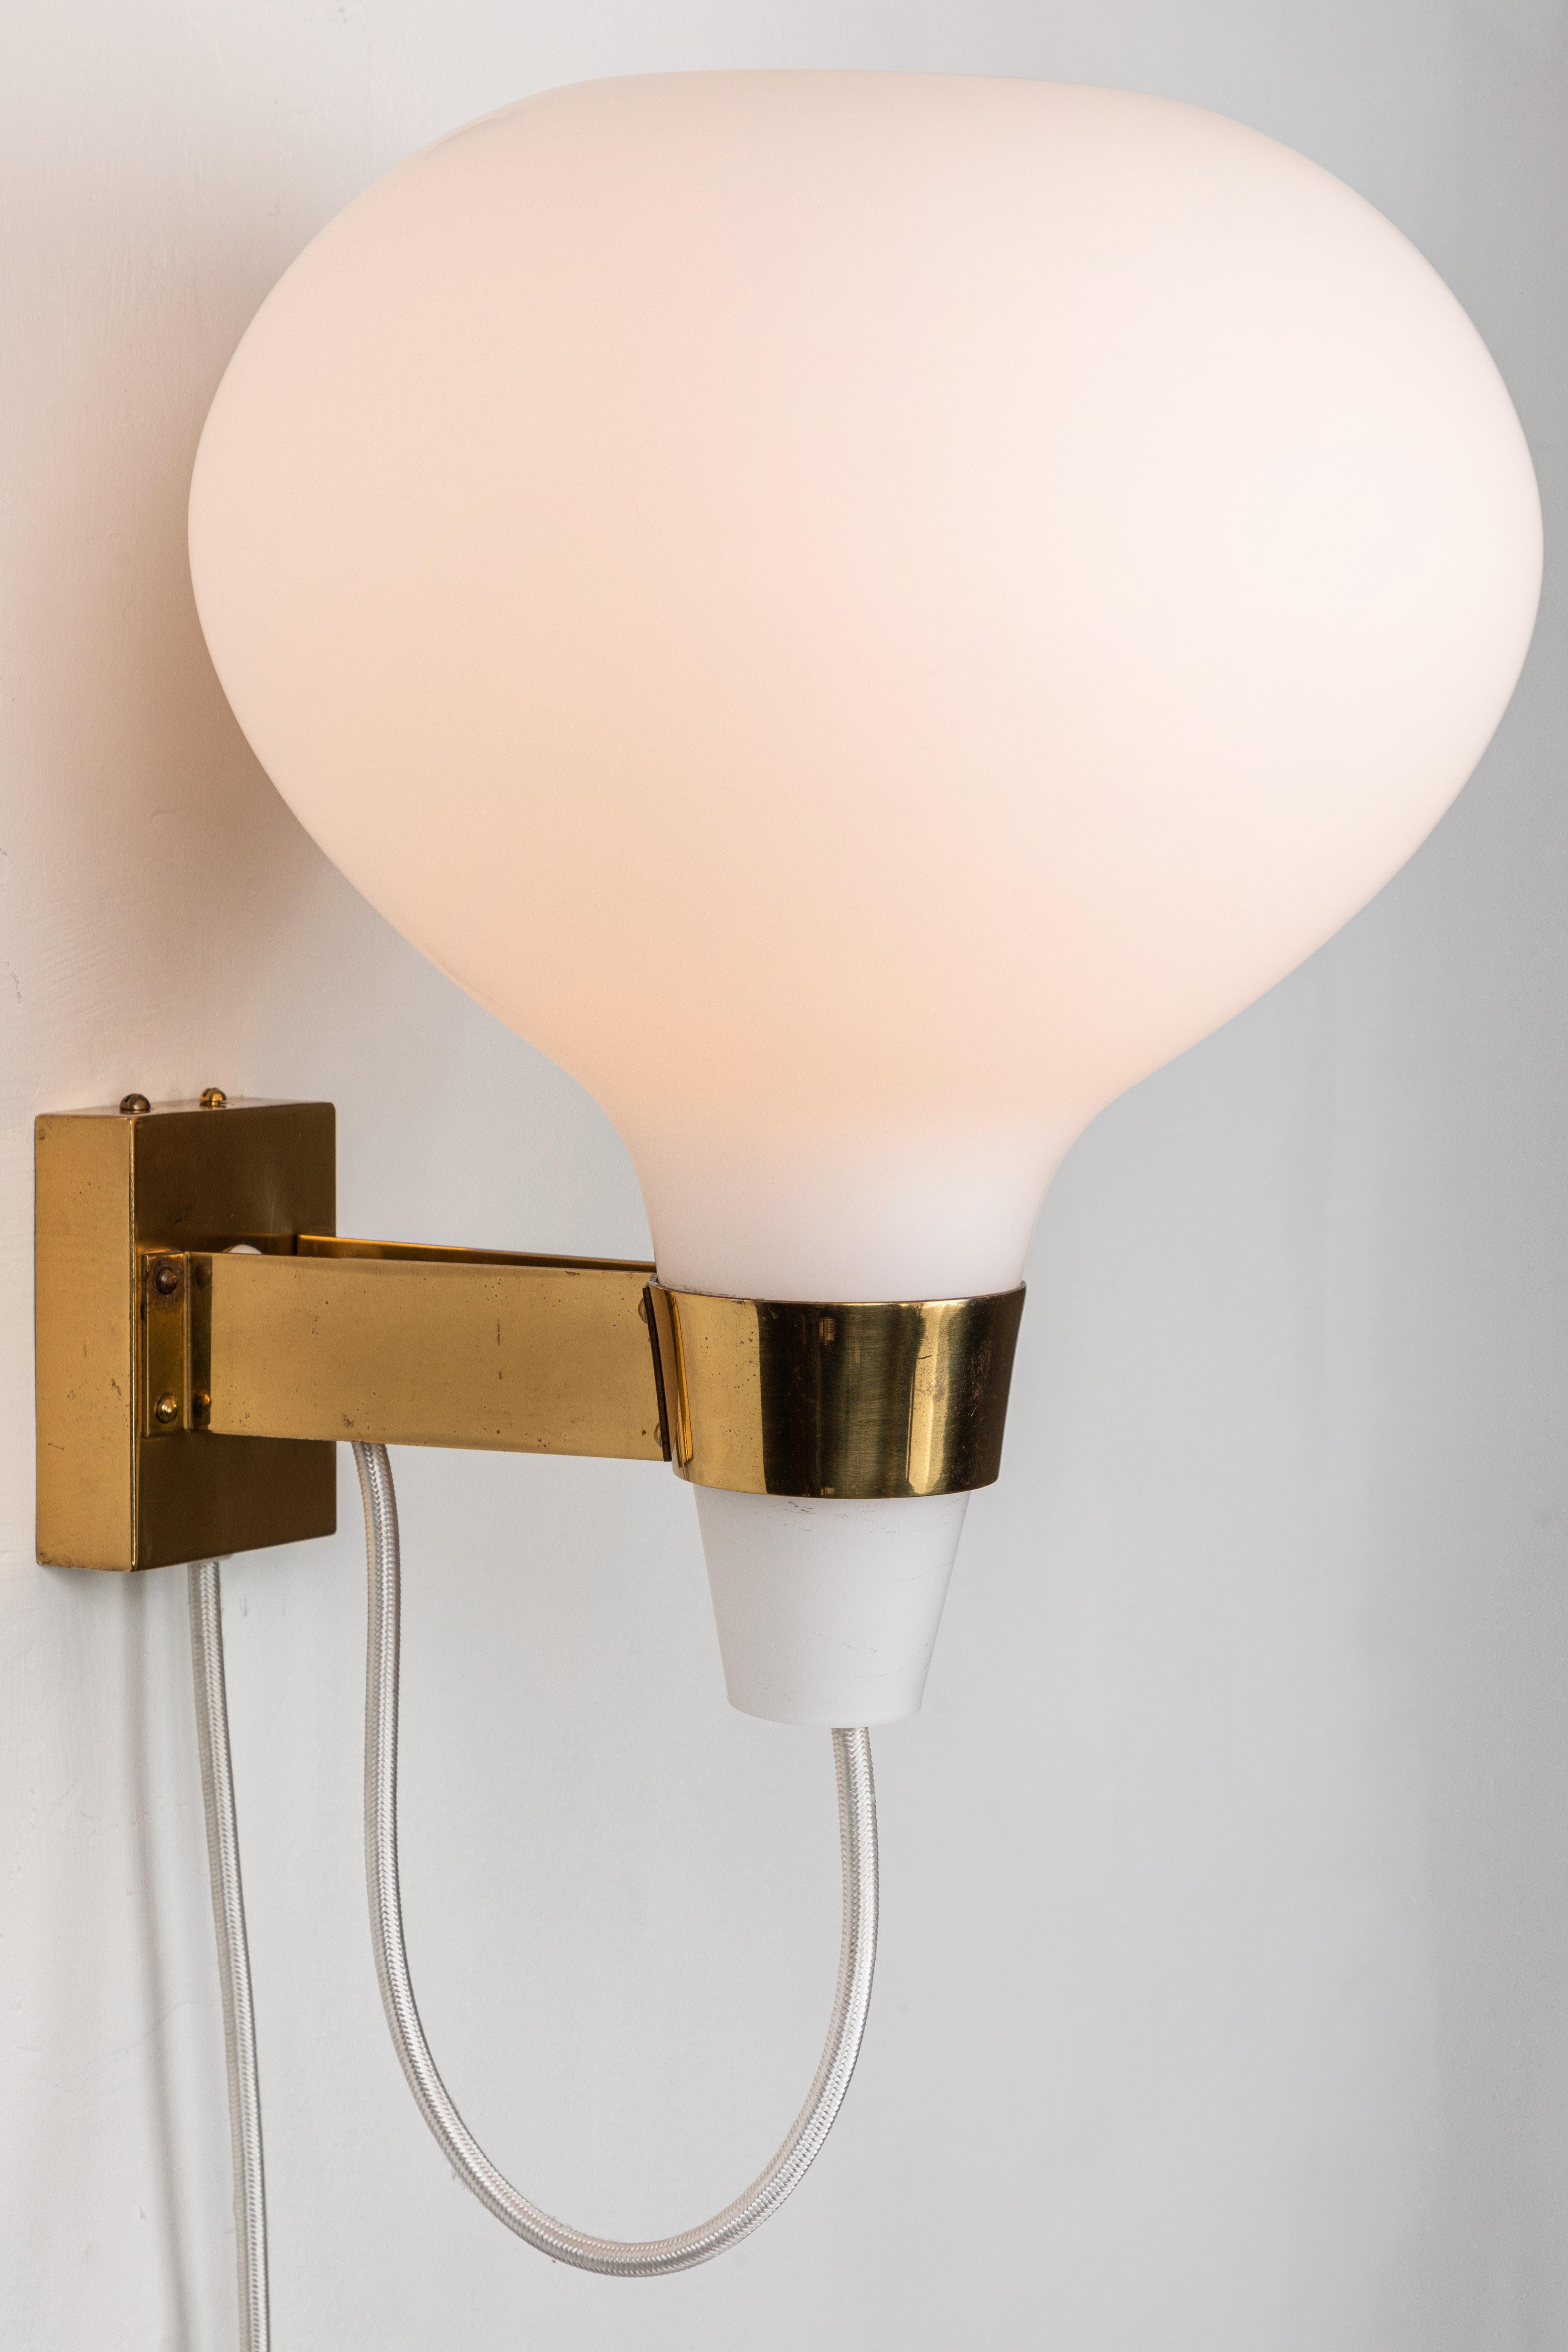 Large 1950s Lisa Johansson-Pape Bulbo glass and brass wall lamp for Orno. Executed in matte opaline white glass and patinated brass.

One lamp available. 

A contemporary of Paavo Tynell, the refined work of Lisa Johansson-Pape has made her an